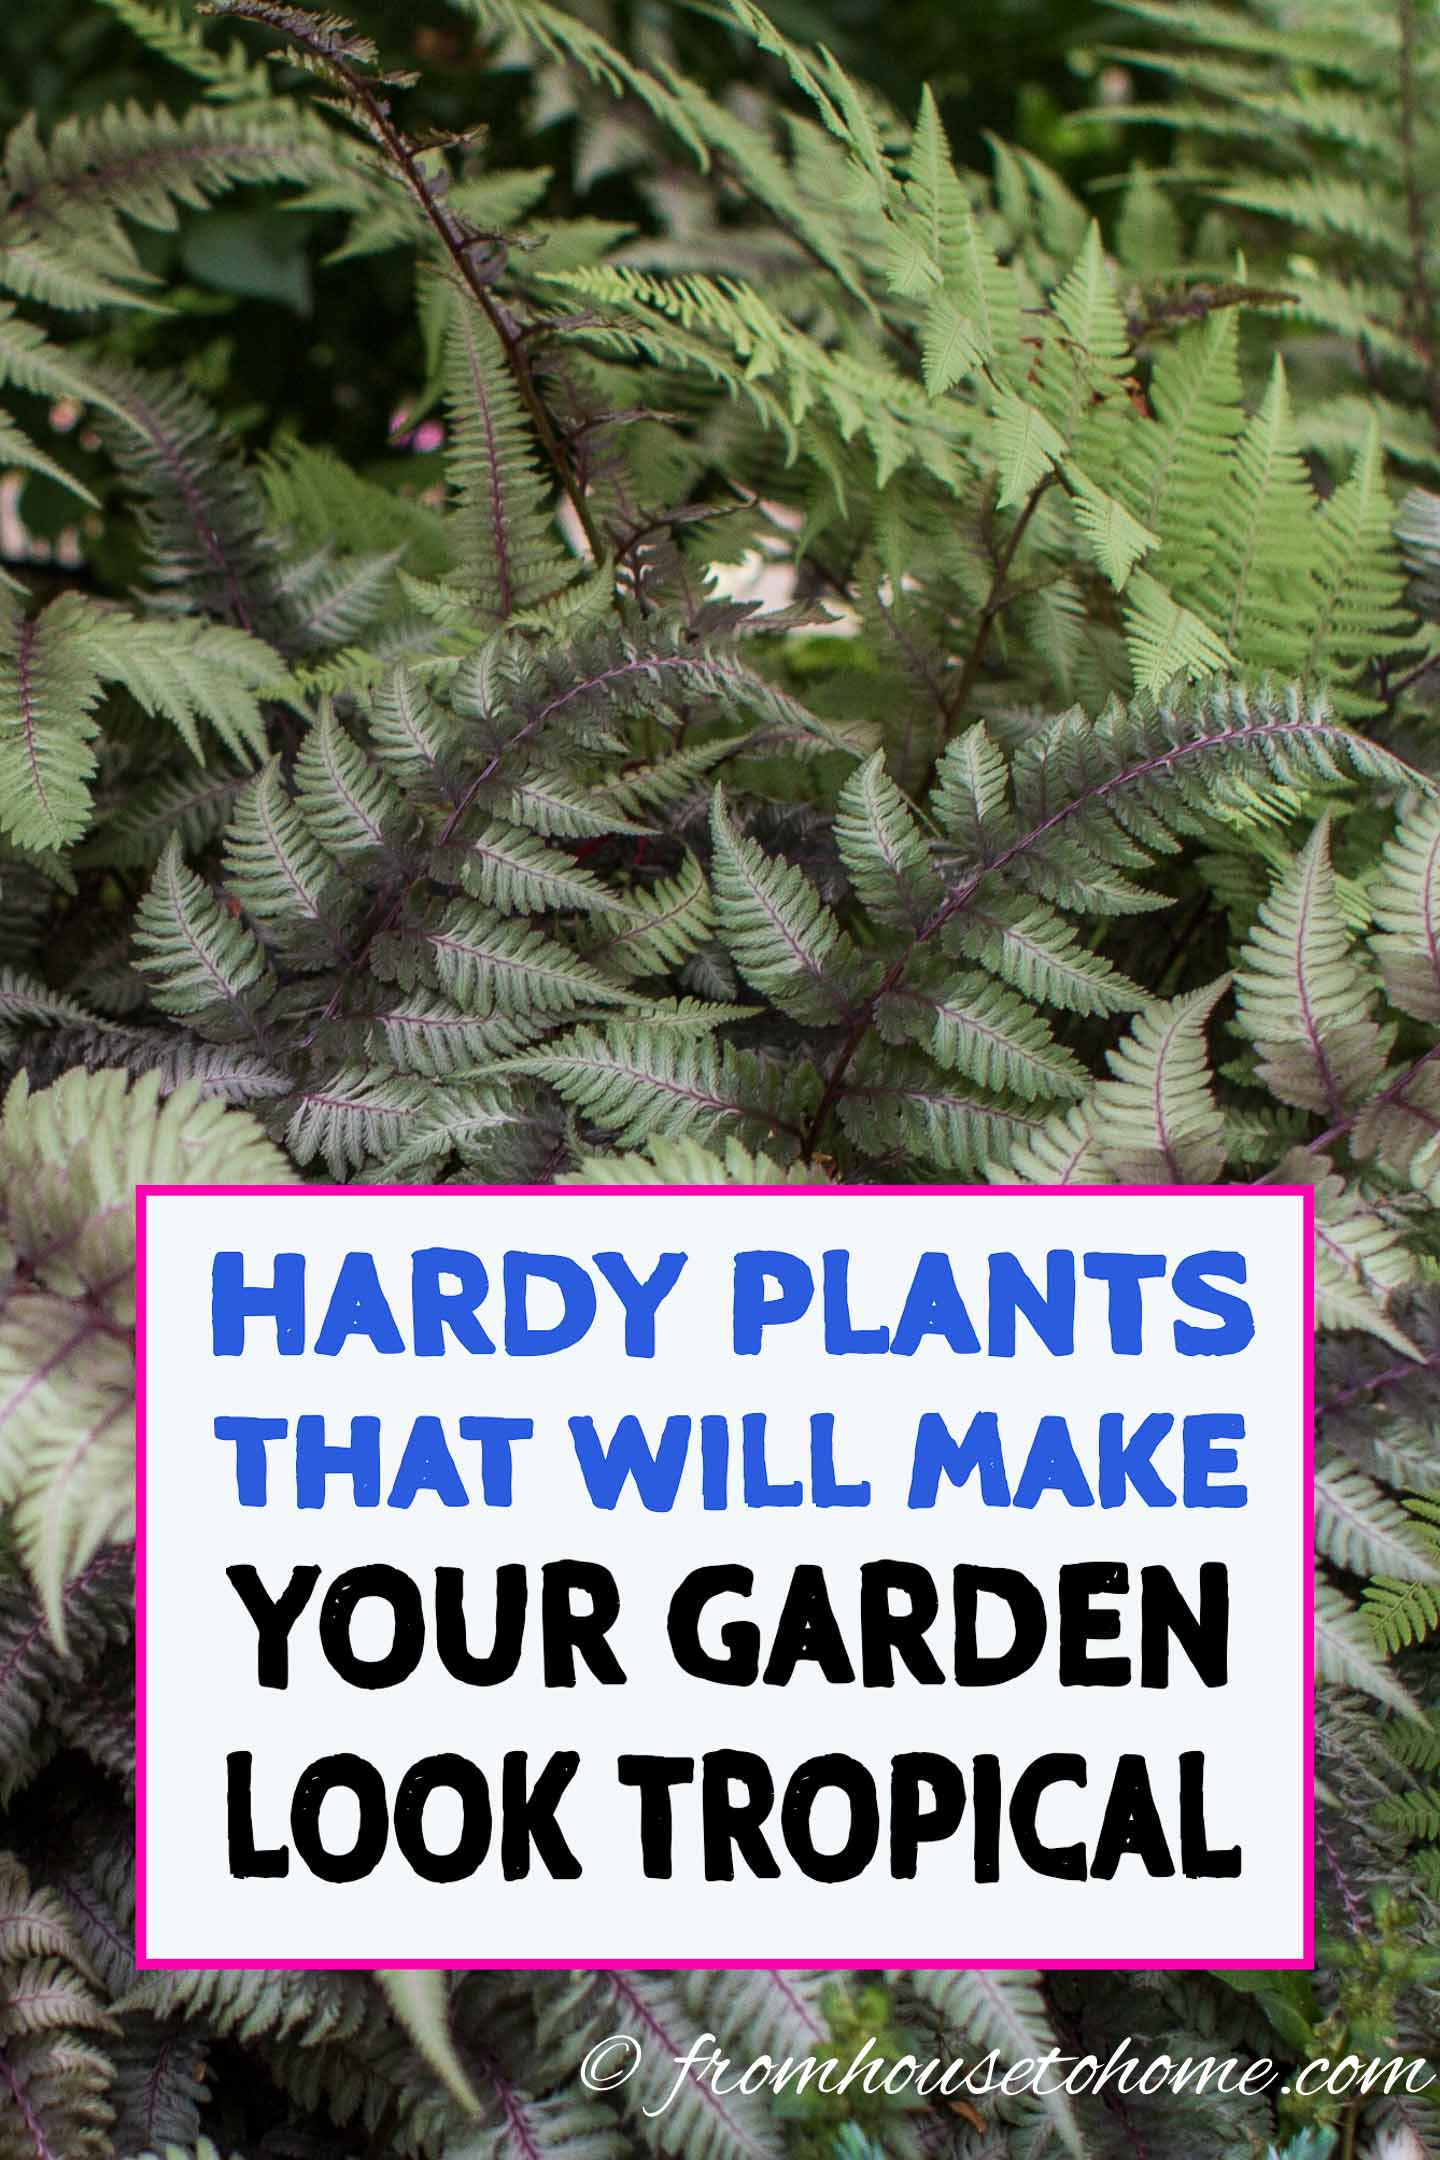 Hardy plants that look tropical